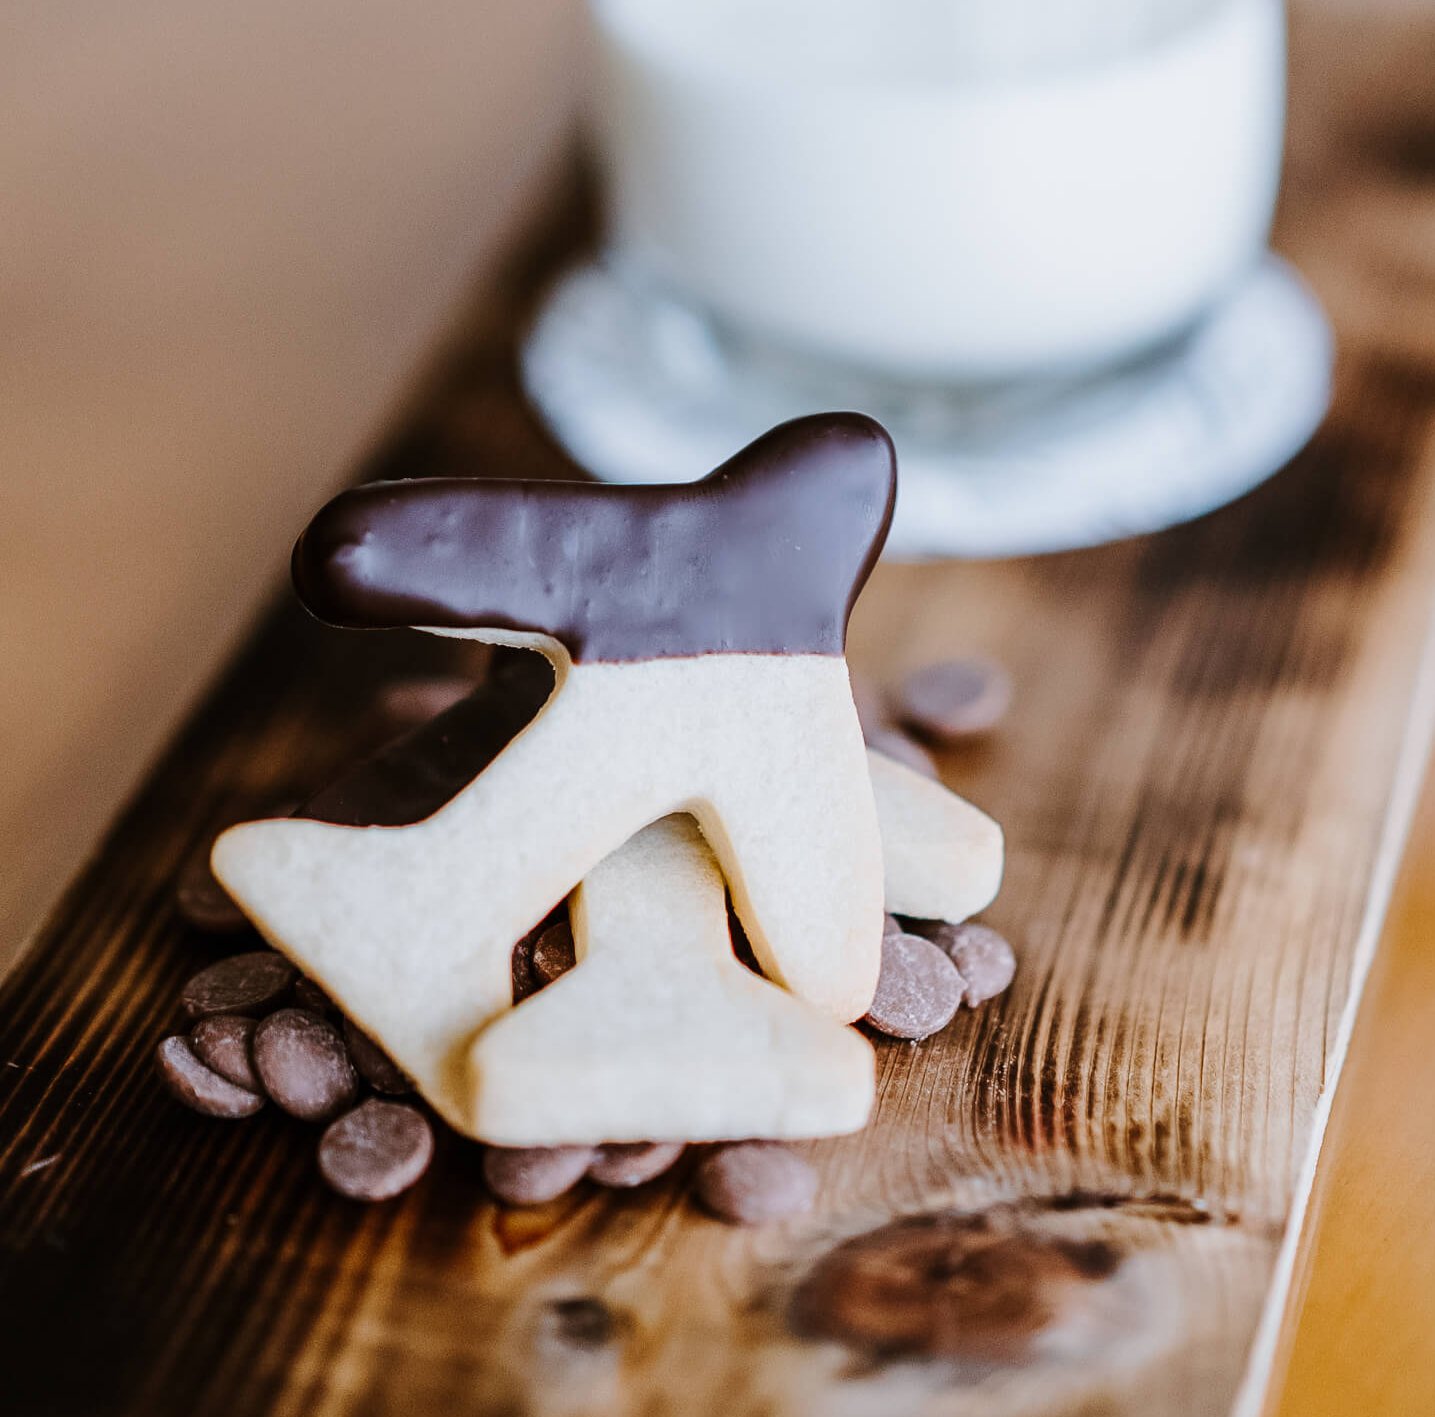 A board with a glass of milk and airplane-shaped cookies dipped in chocolate.